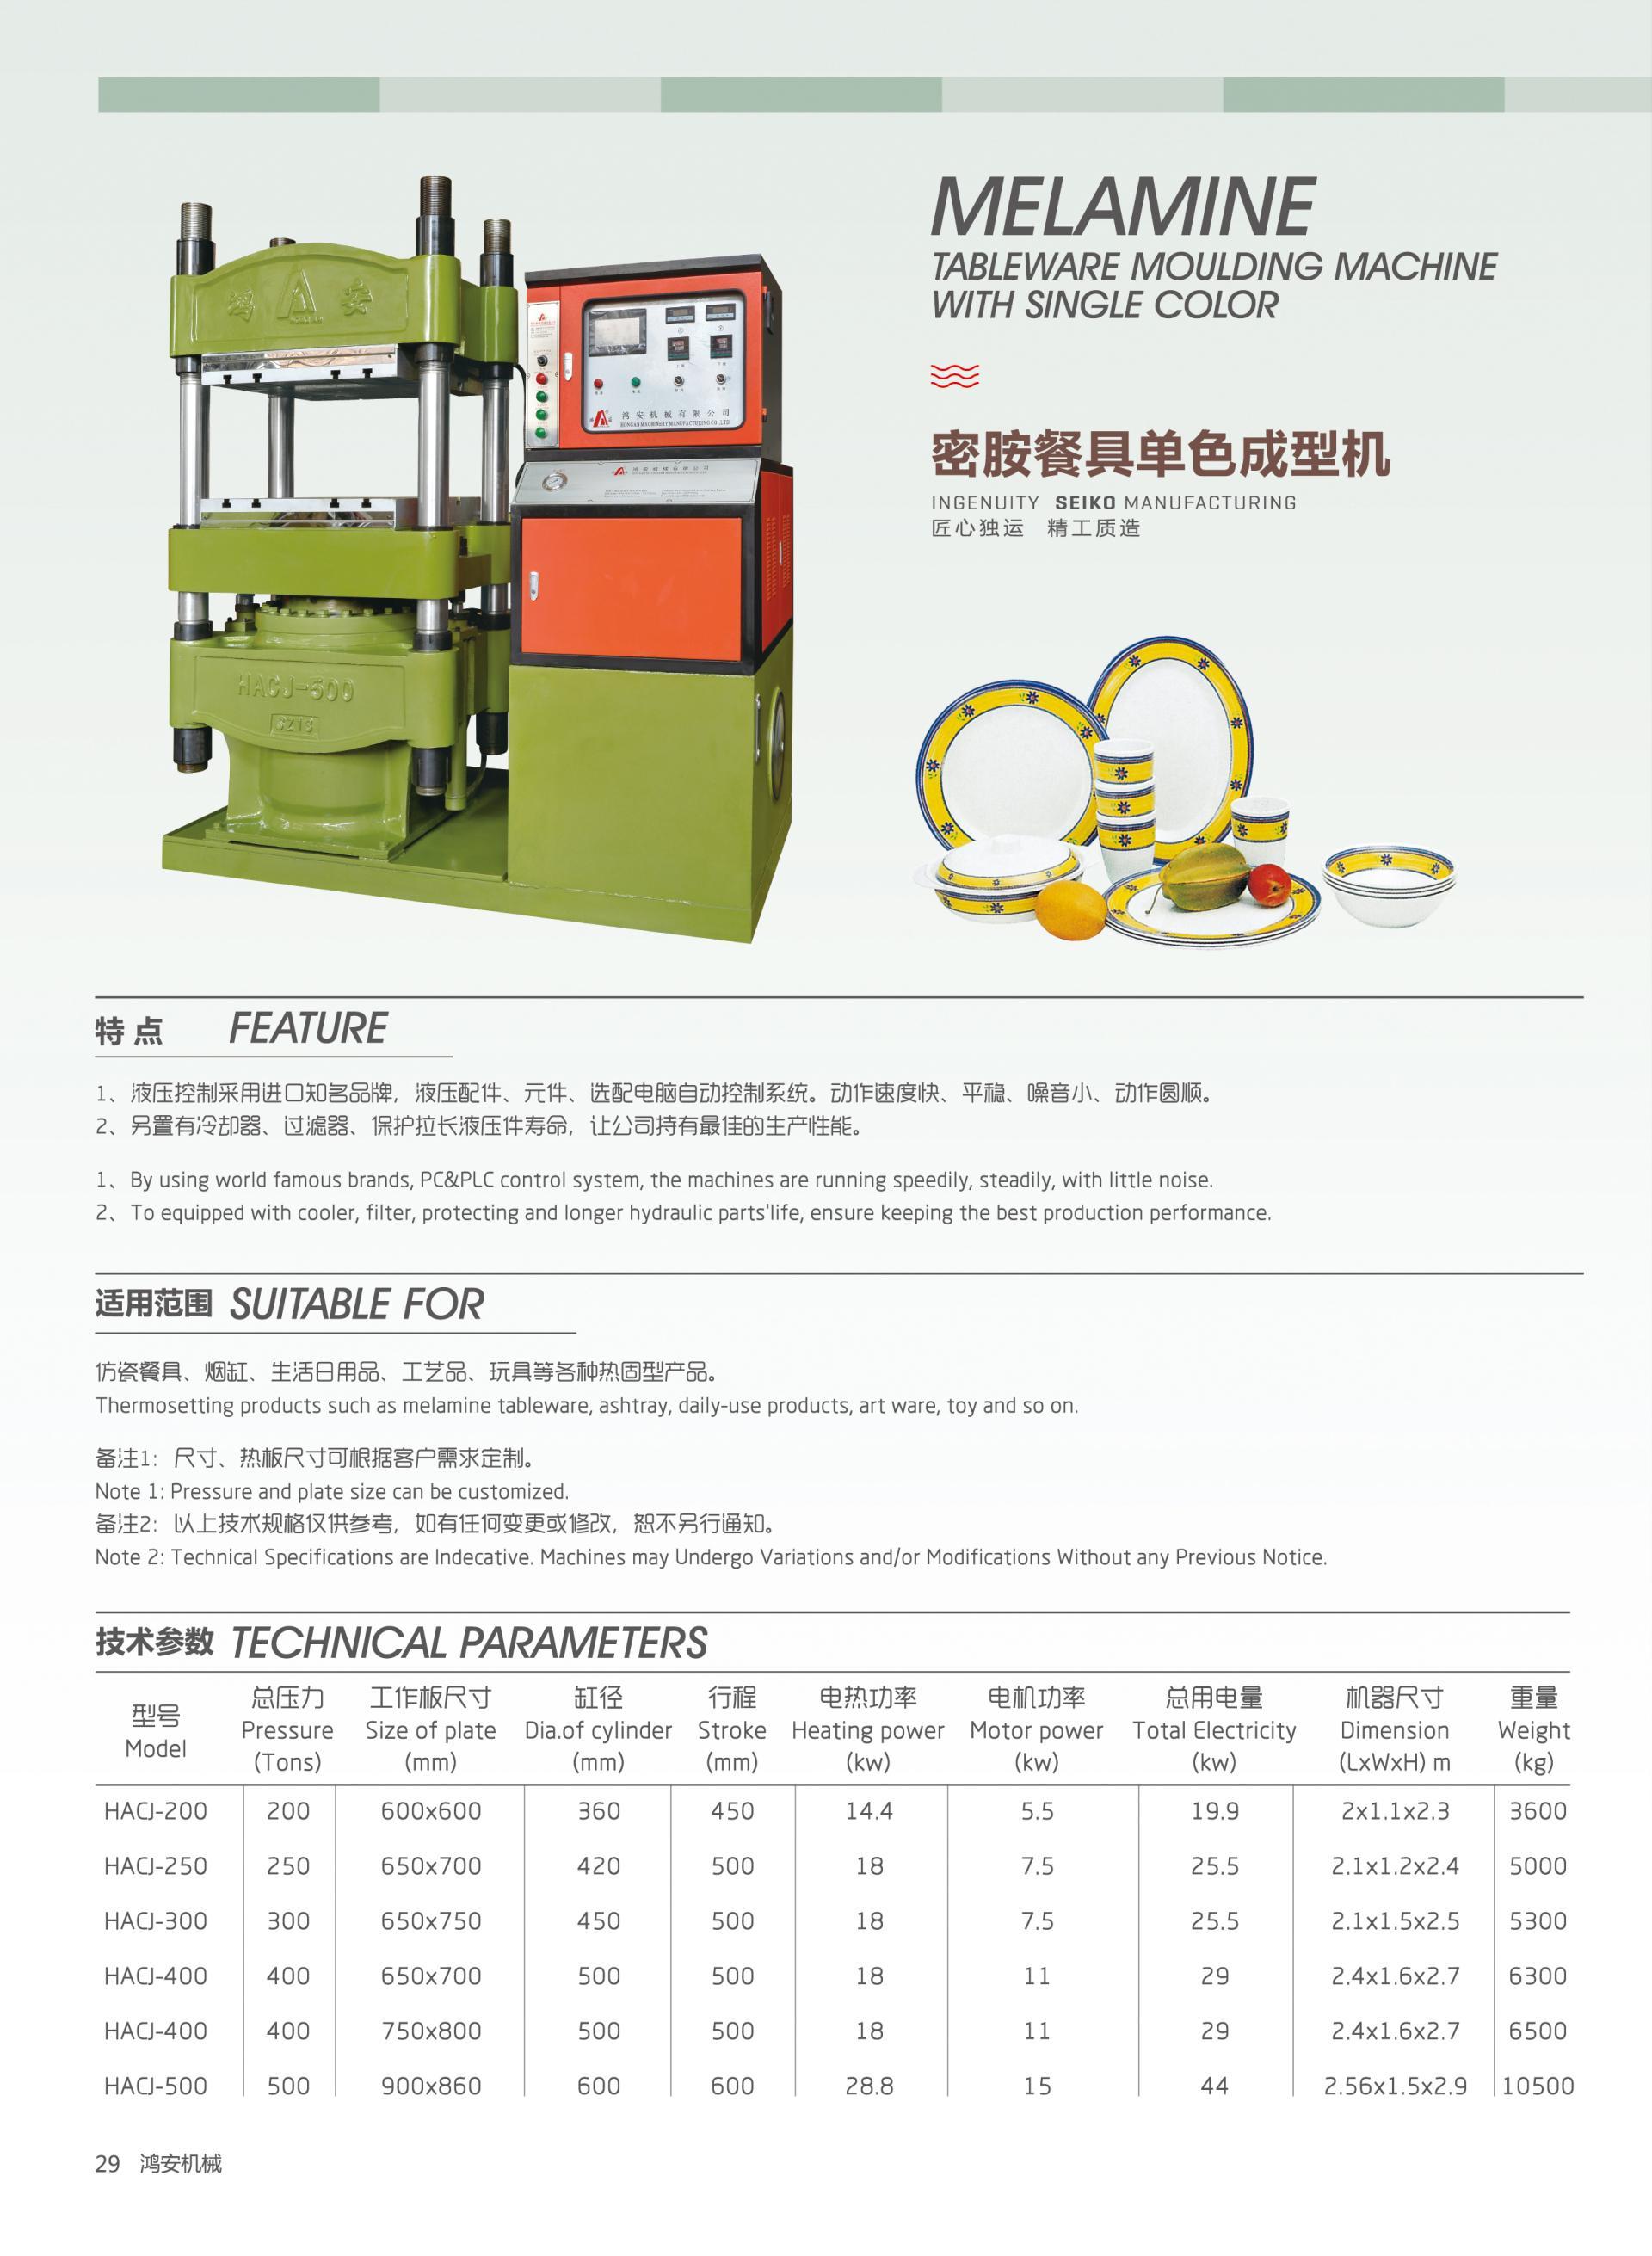 Melamine tableware moulding machine with single color